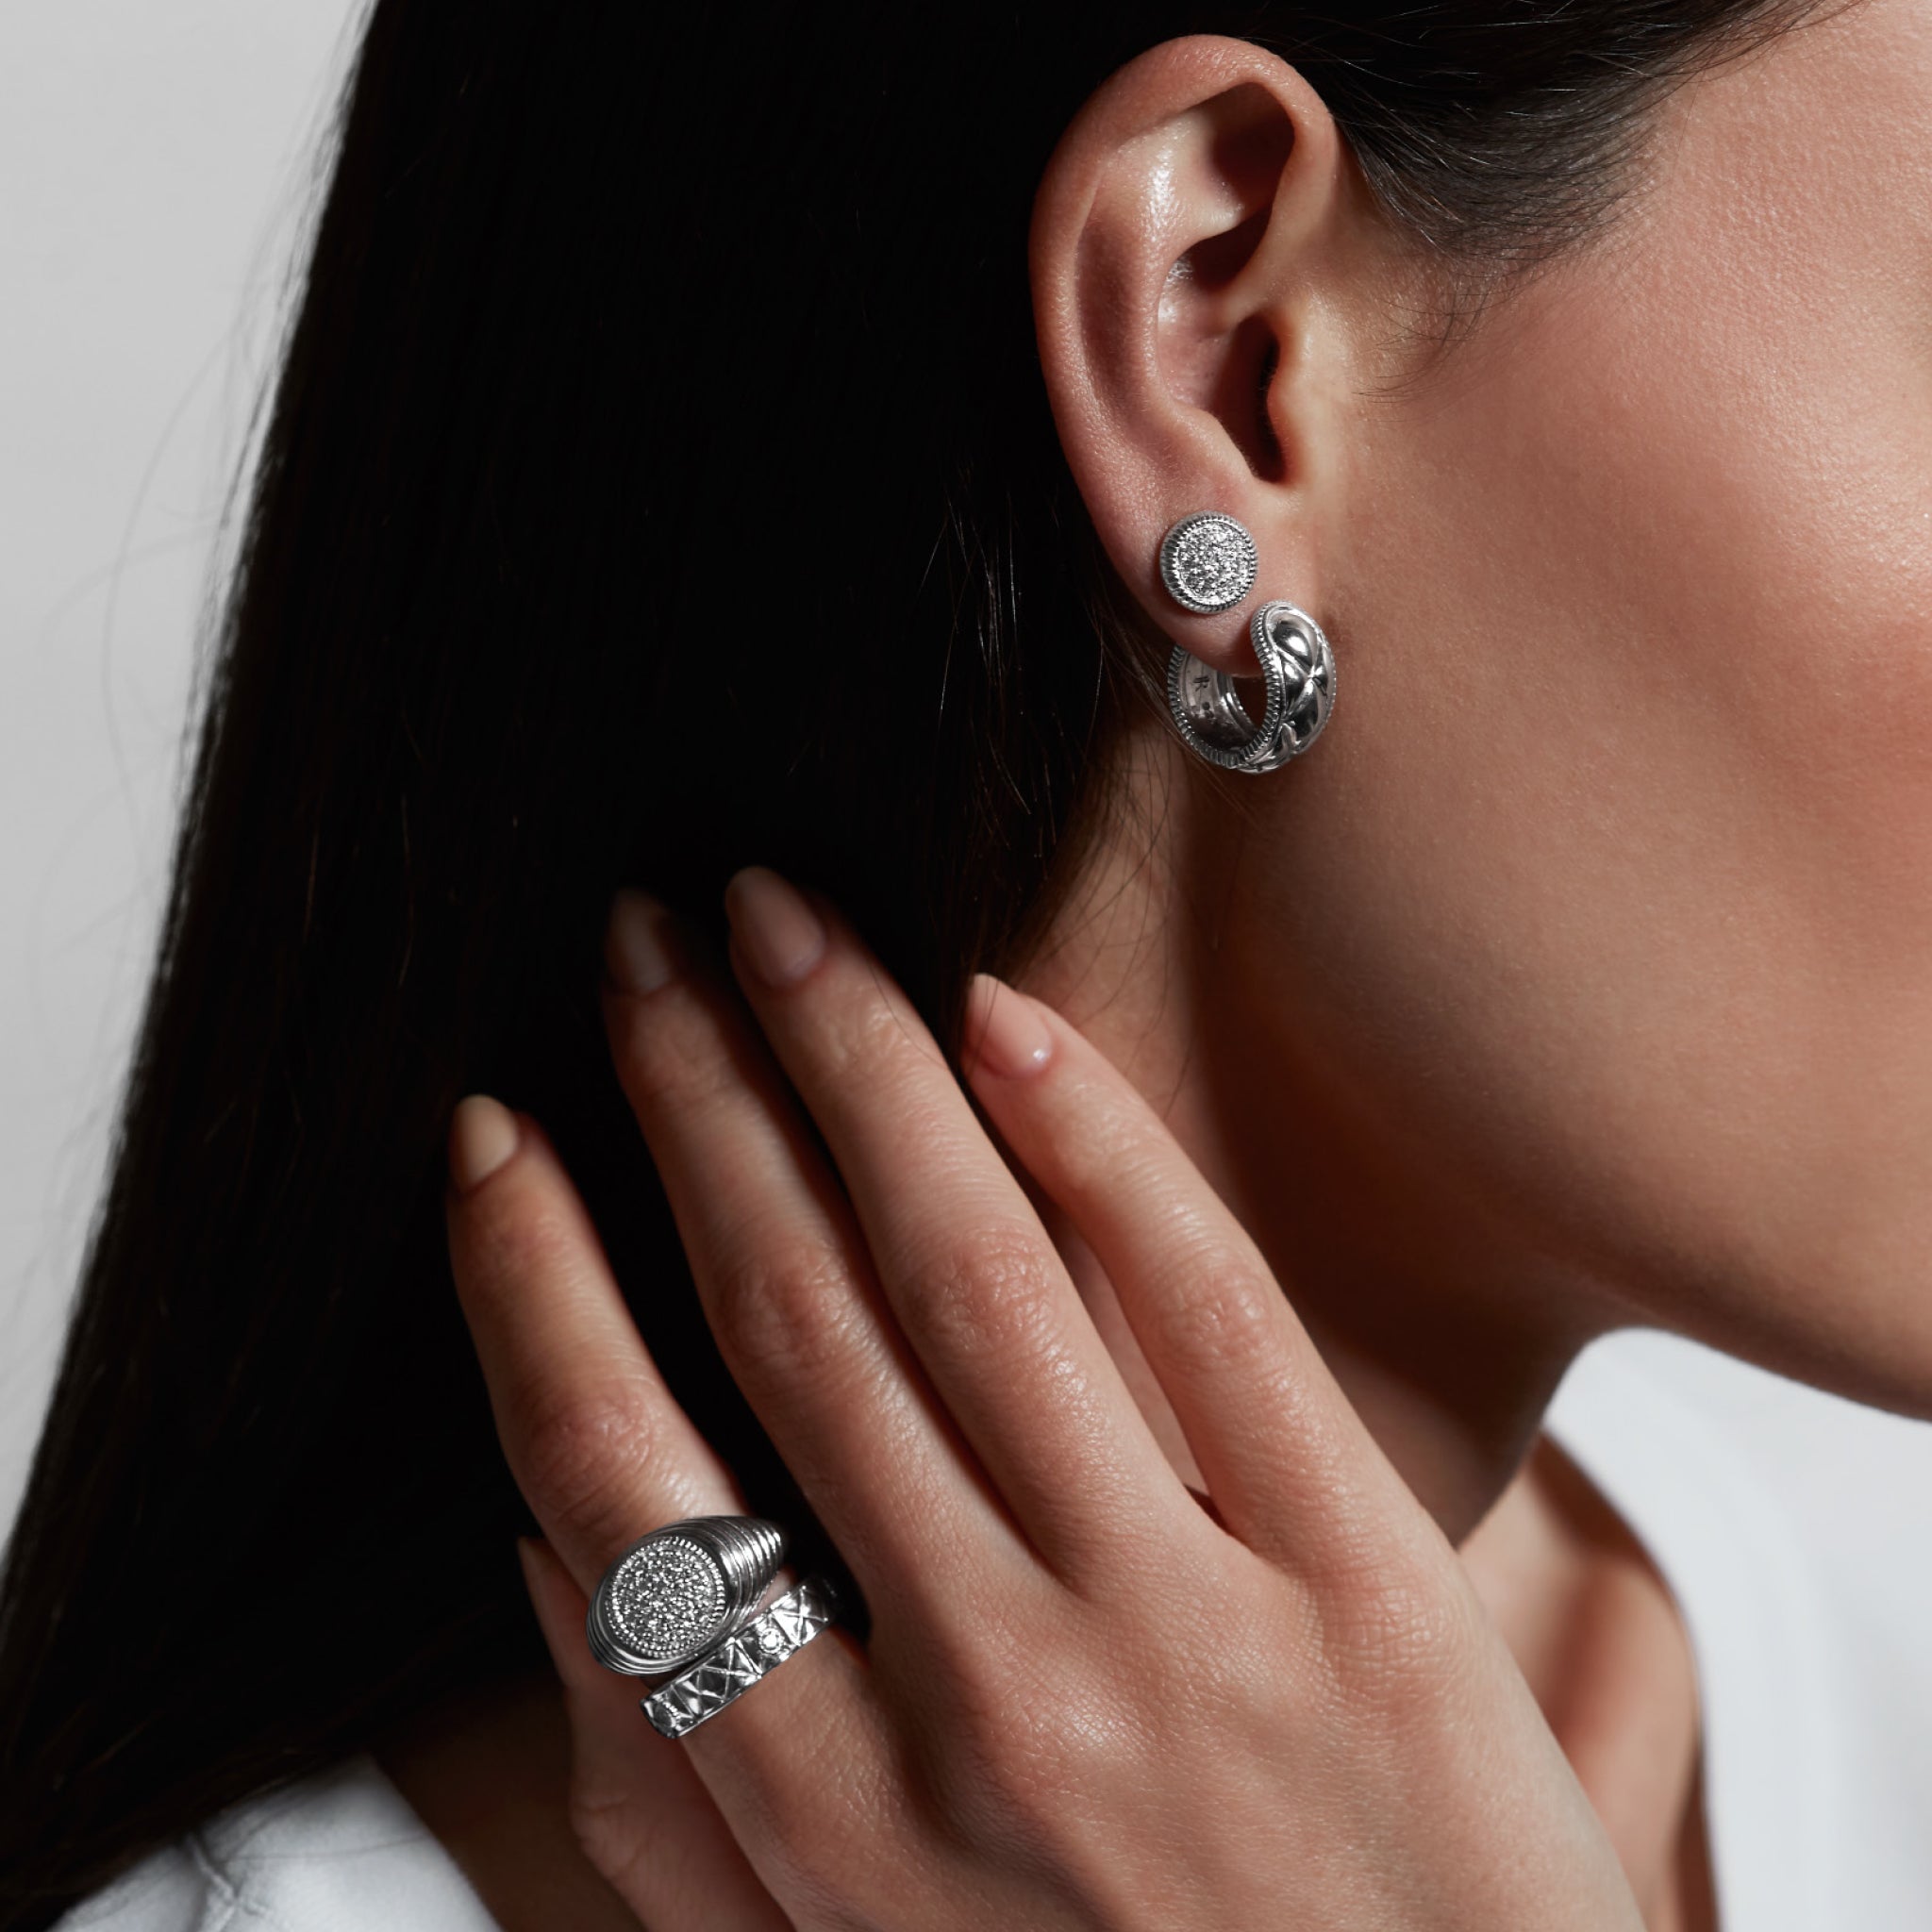 Max Pave Stud Earrings with Diamonds